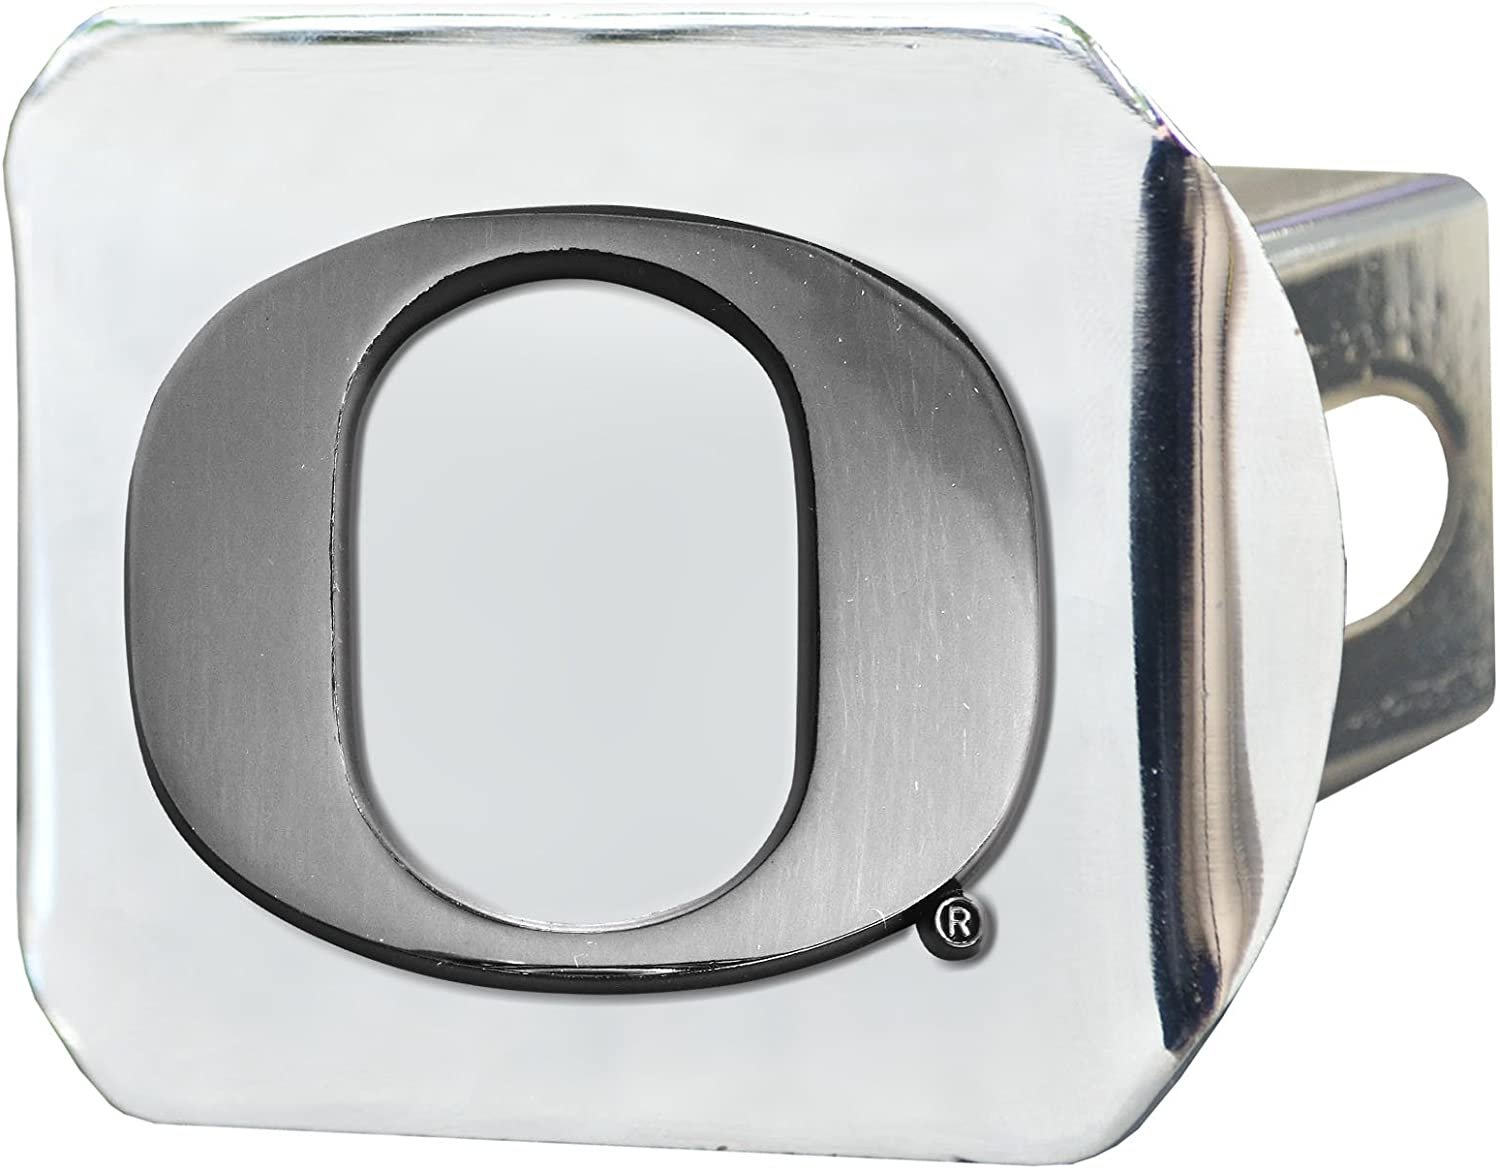 Oregon Ducks Solid Metal Hitch Cover with Chrome Metal Emblem 2 Inch Square Type III University of